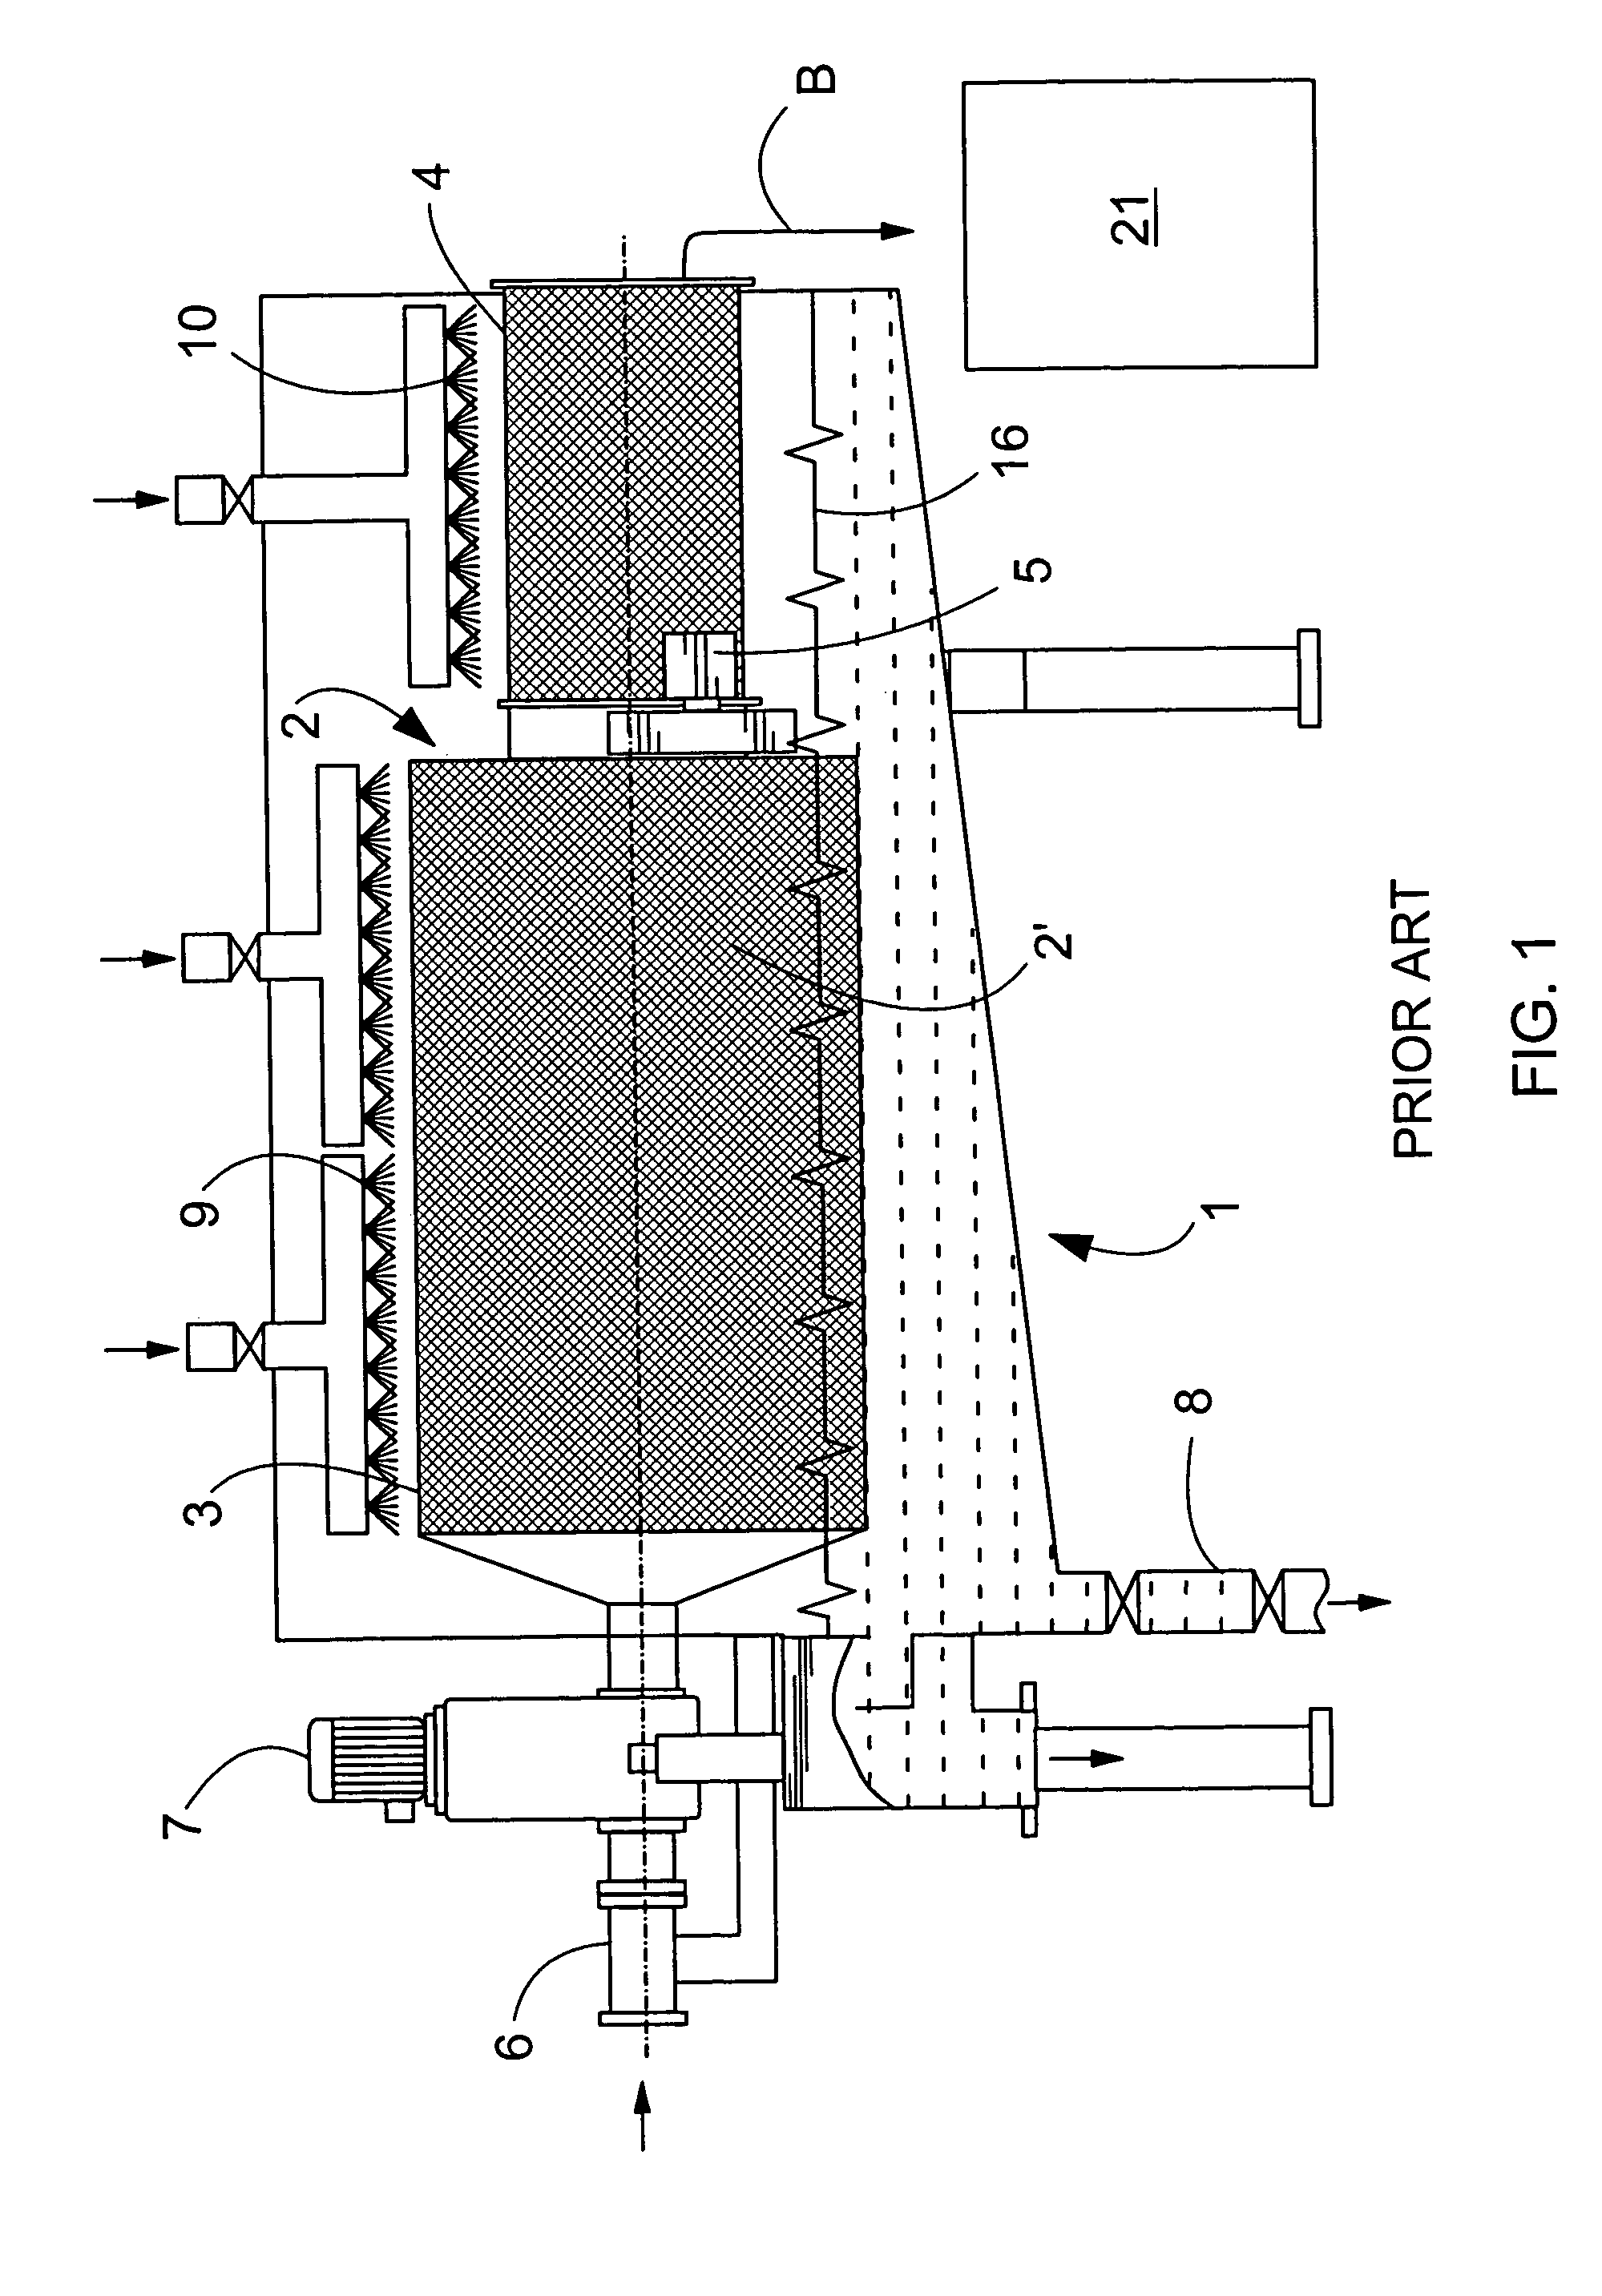 Apparatus for separating fibers from reject material